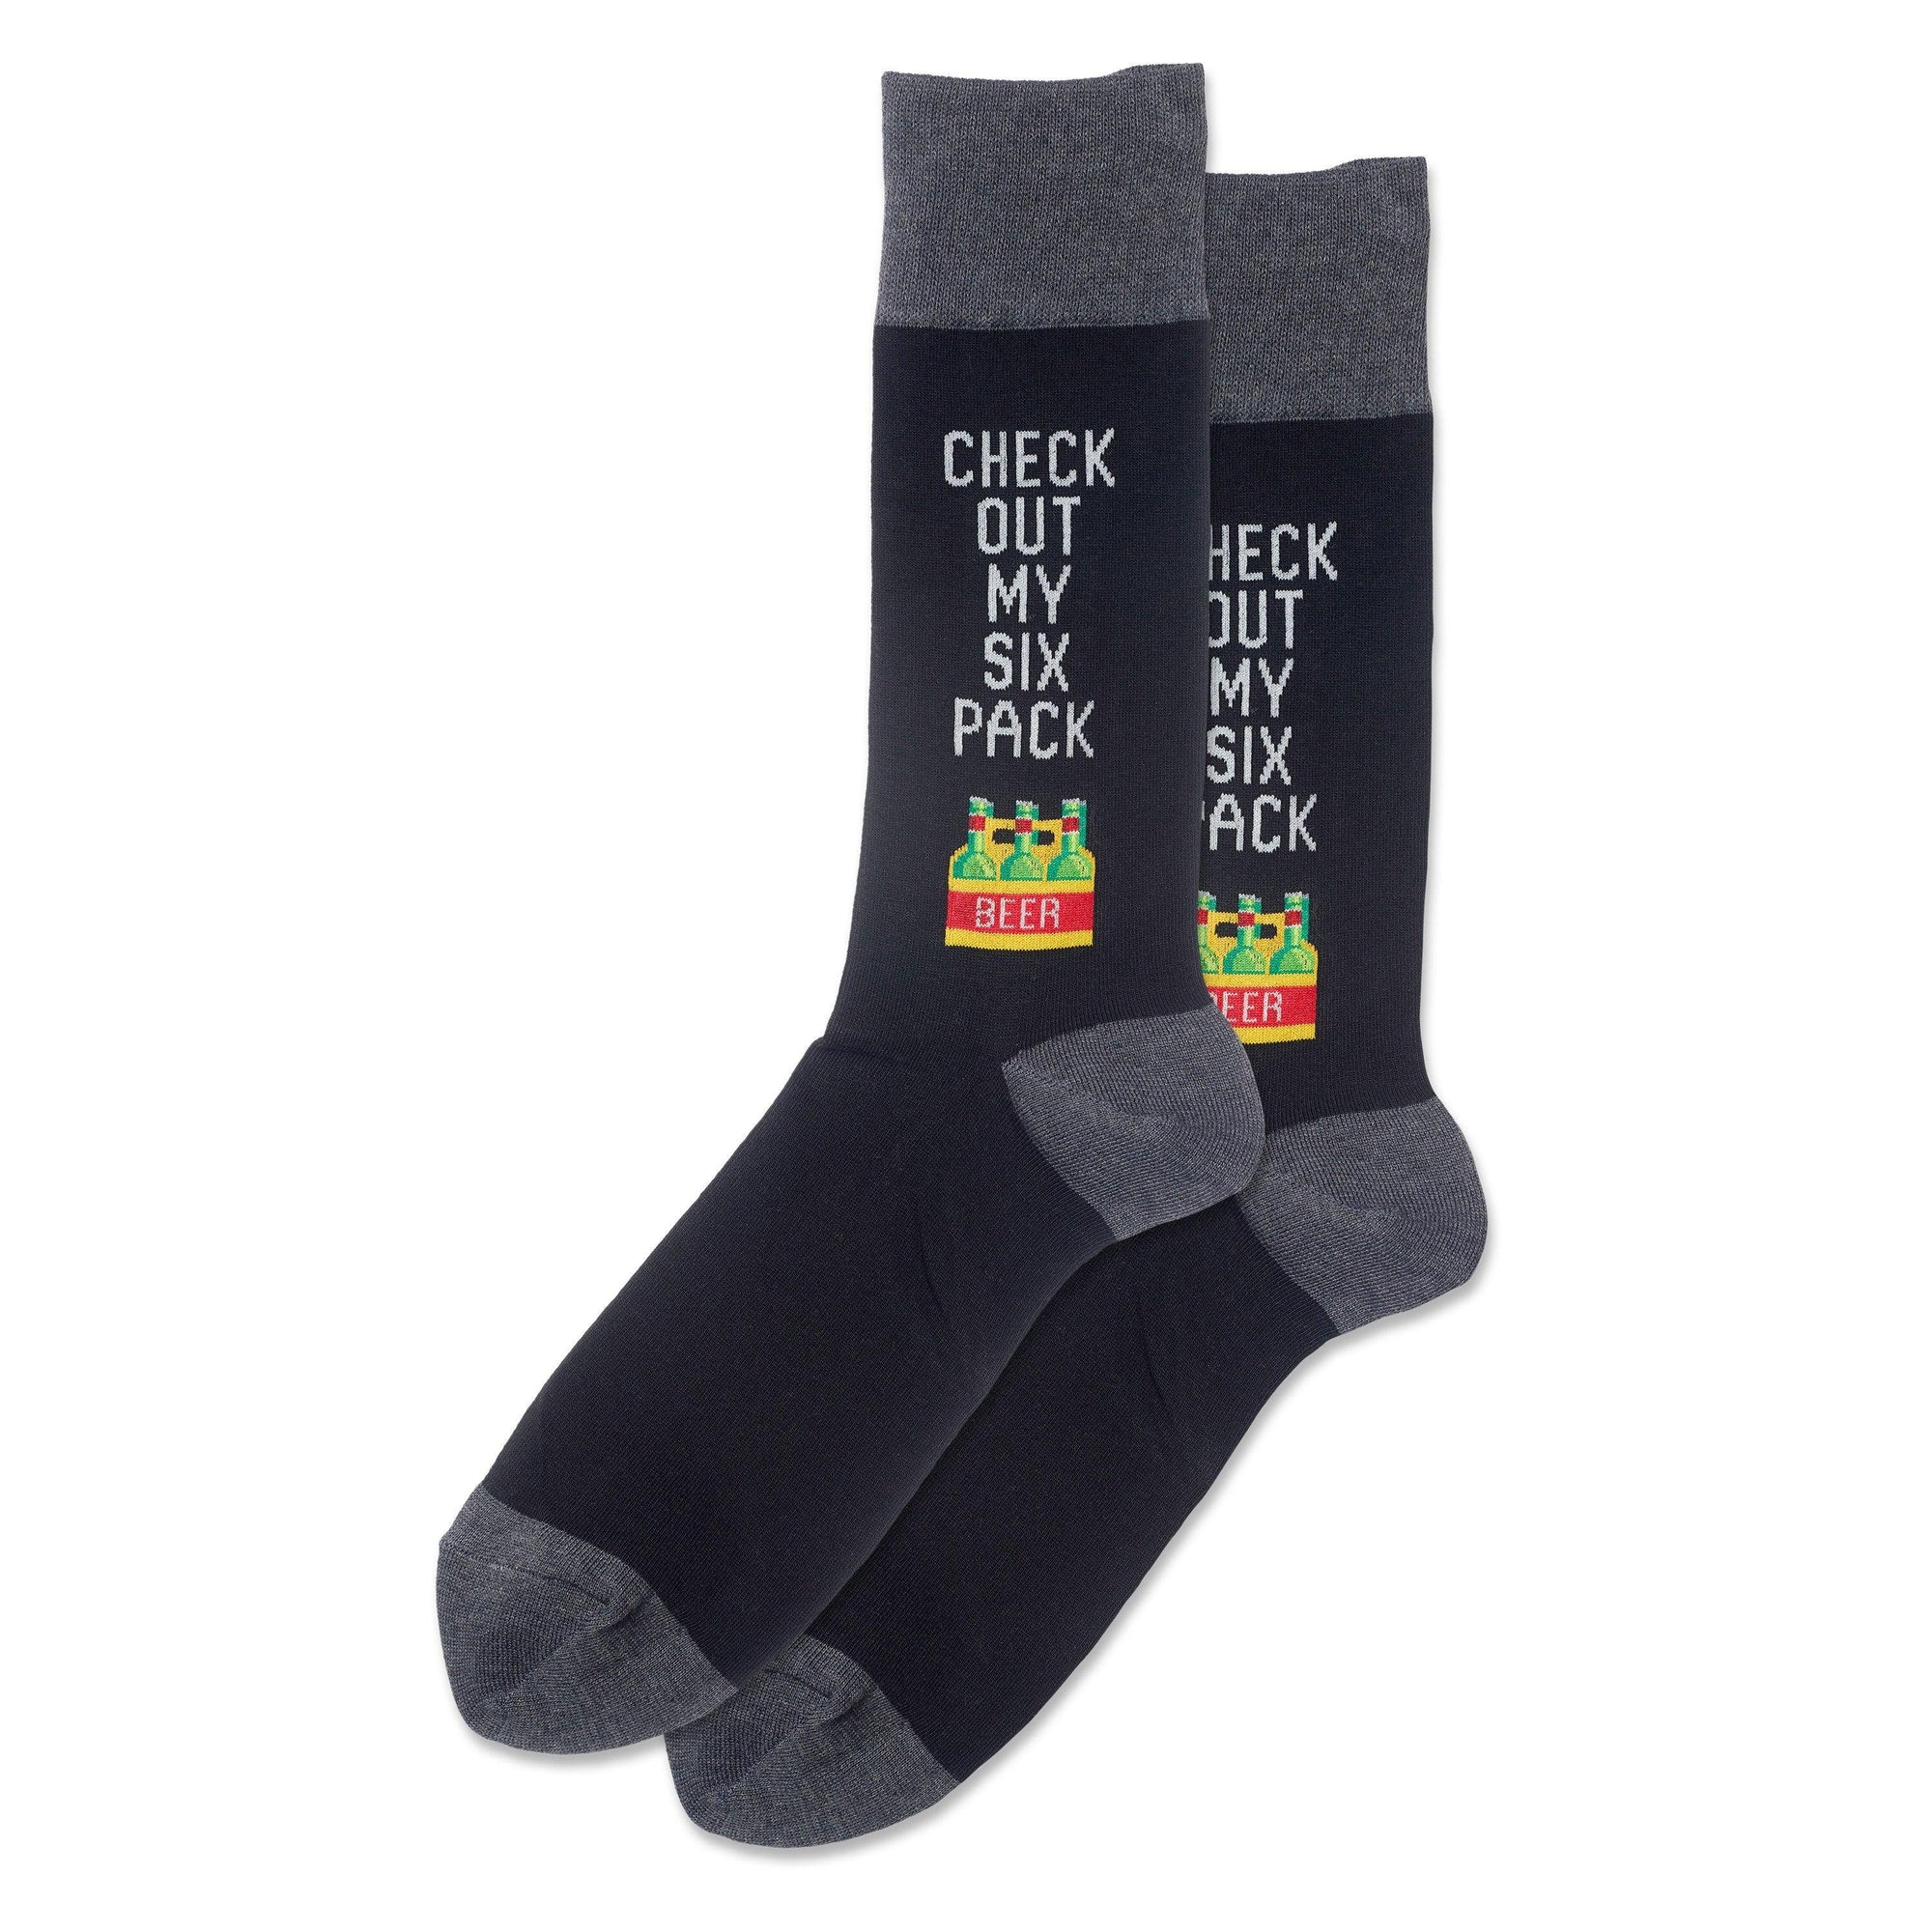 Mens Socks Check Out My Six Pack Black